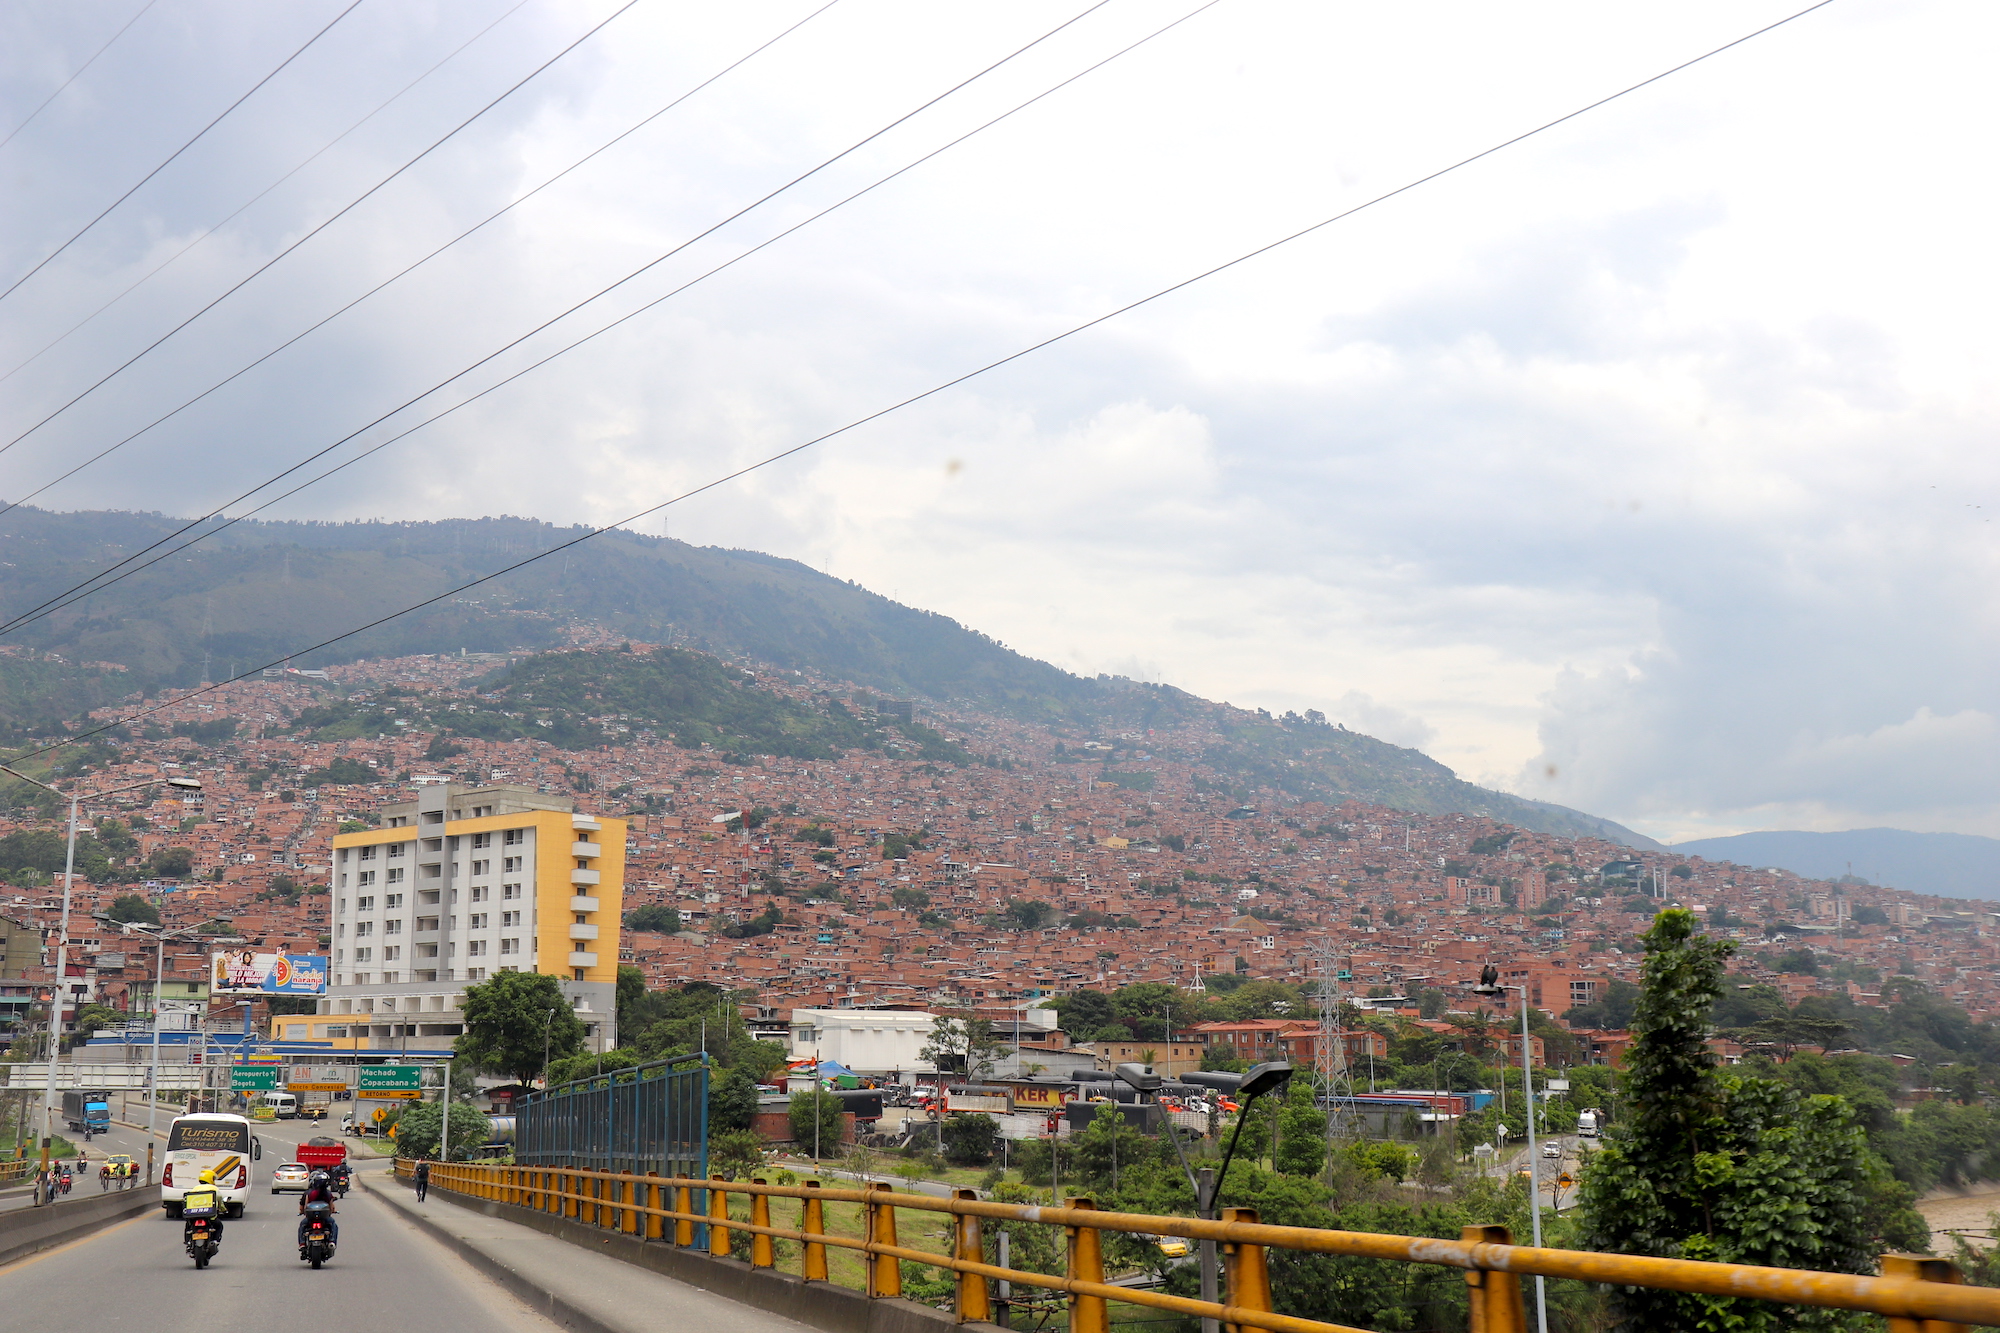 The view to the "barrios" of Medellin positioned on the hills around the city